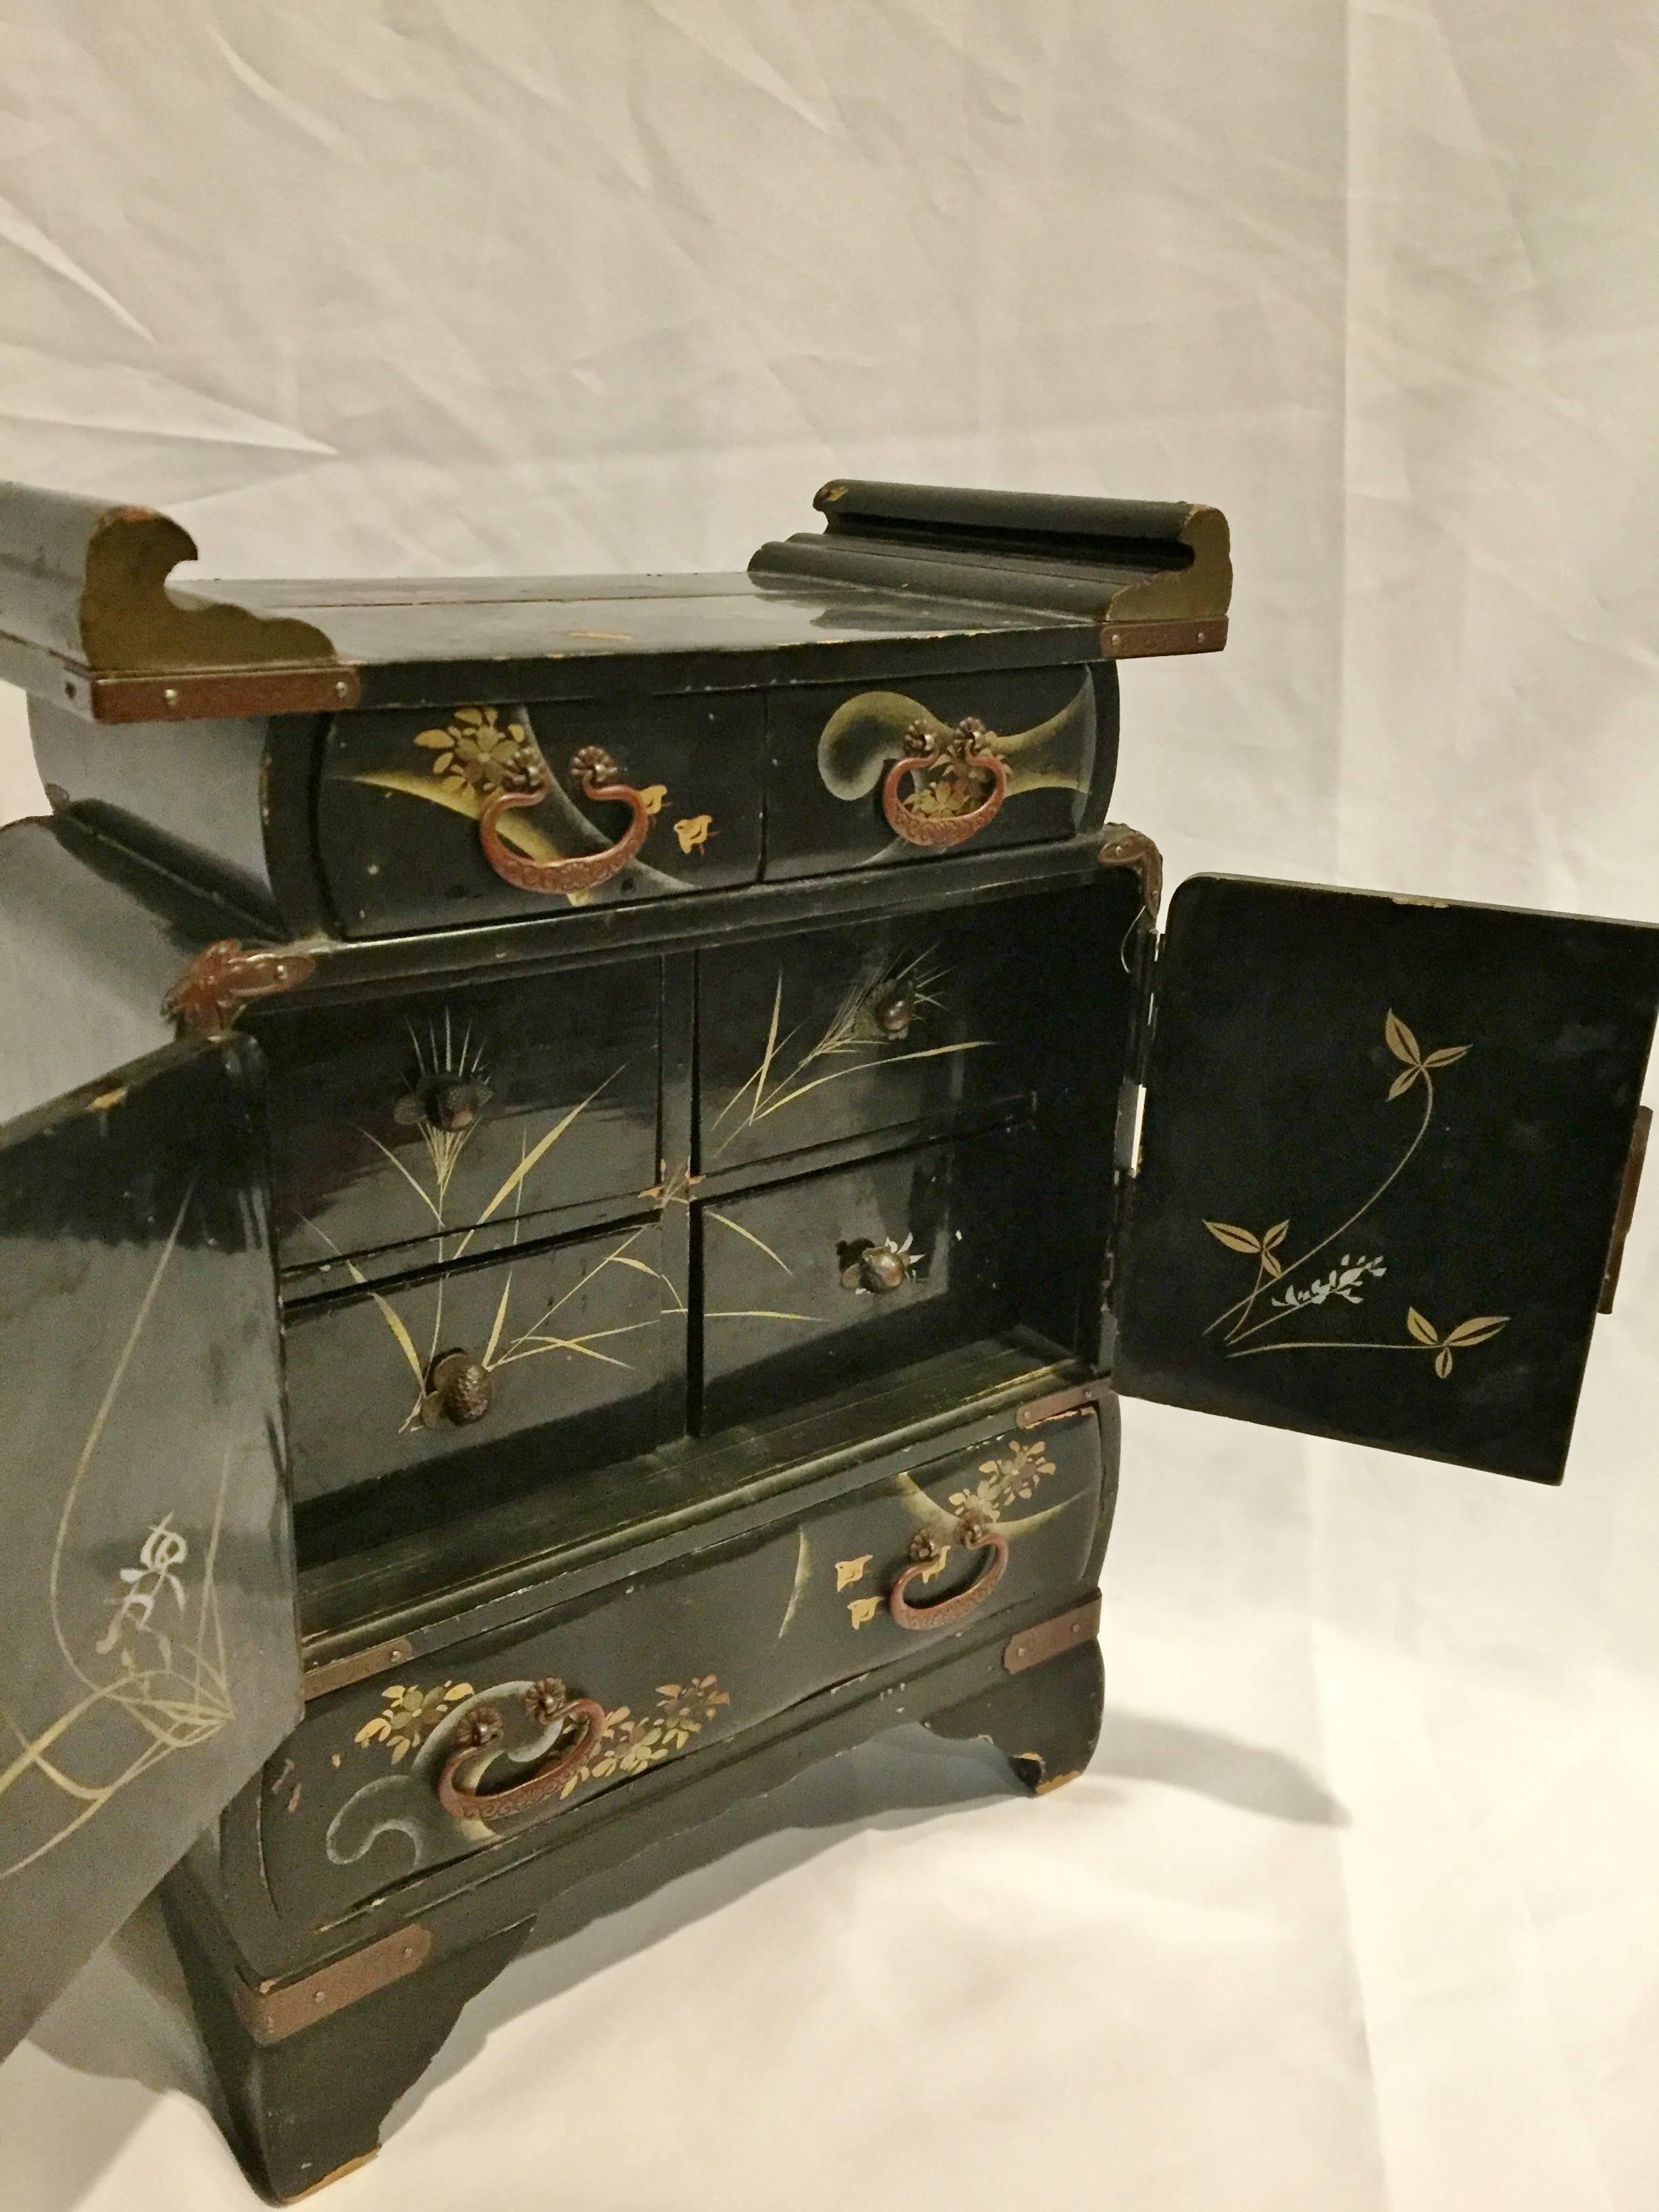 Gilt Exquisite Japanese Lacquer Jewelry Box